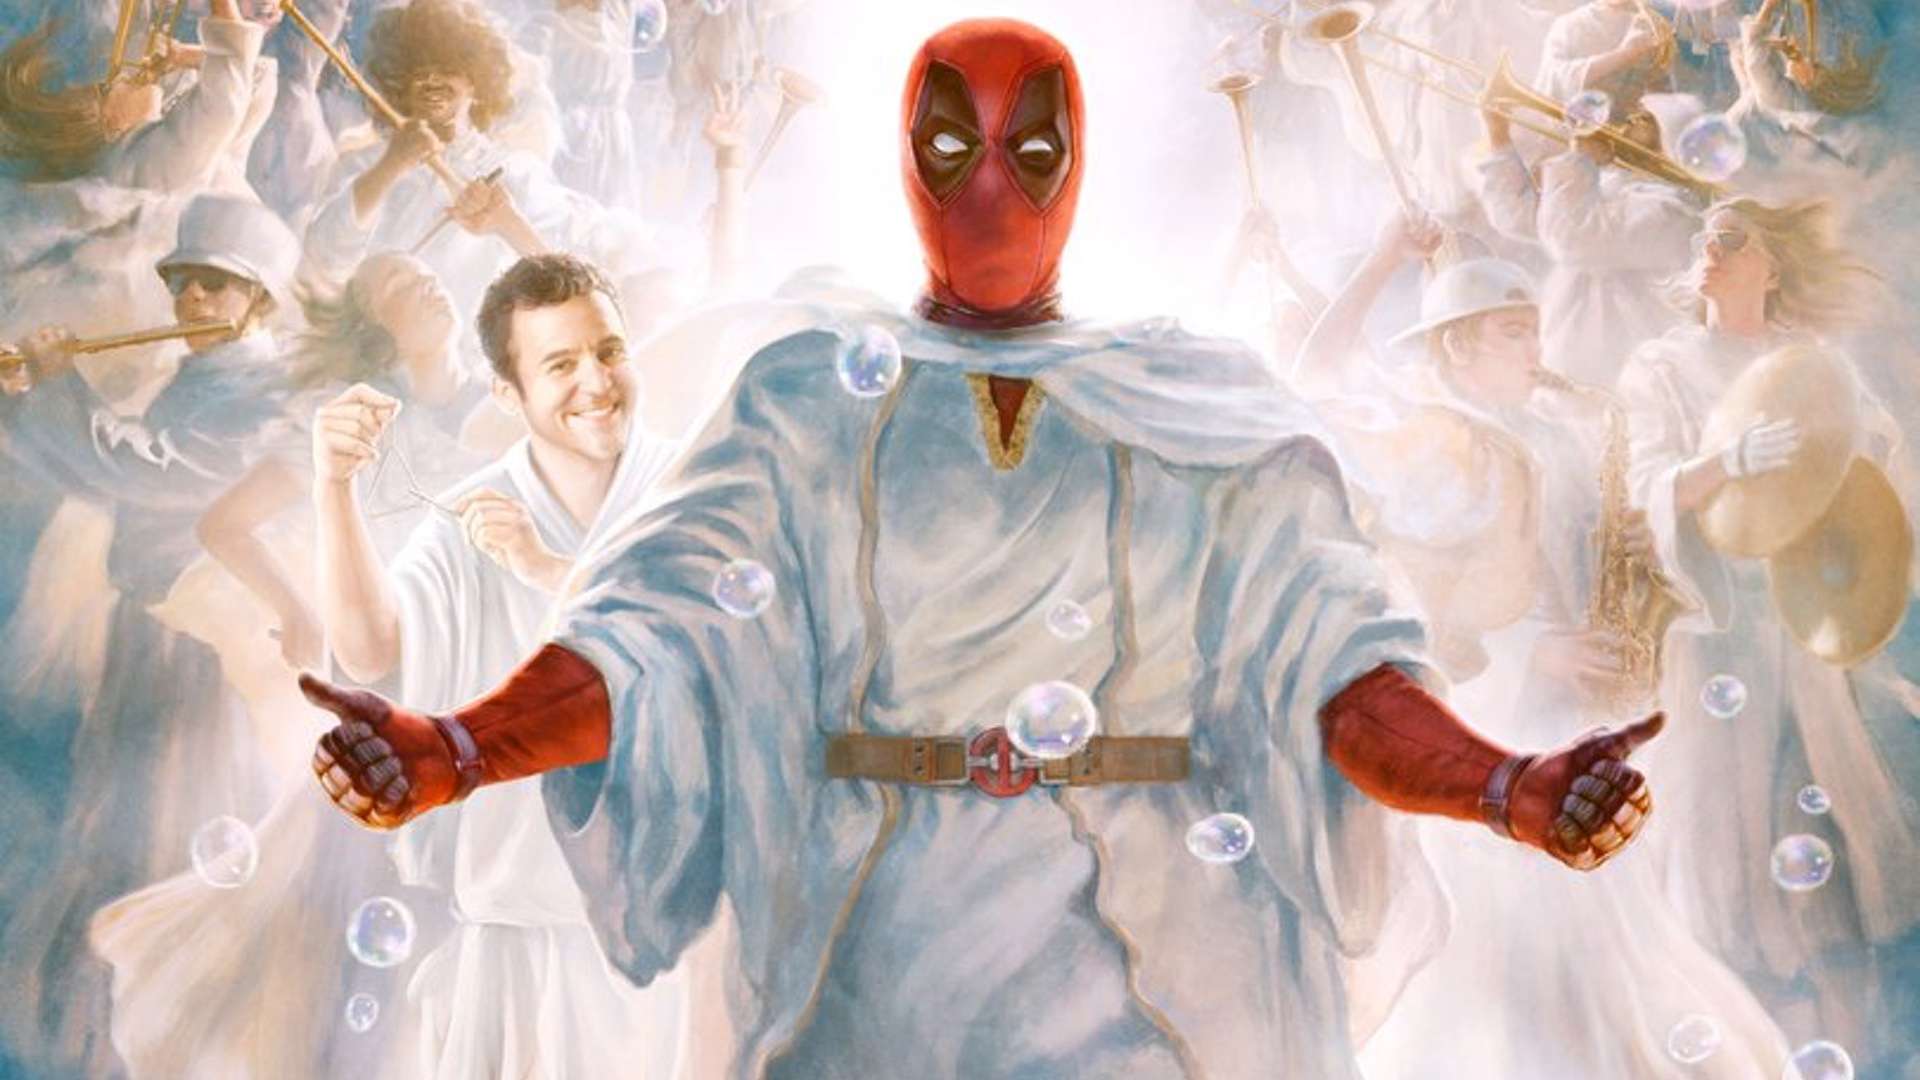 the-latest-poster-from-once-upon-a-deadpool-seems-to-parody-a-painting-of-christ-used-by-the-lds-church-social